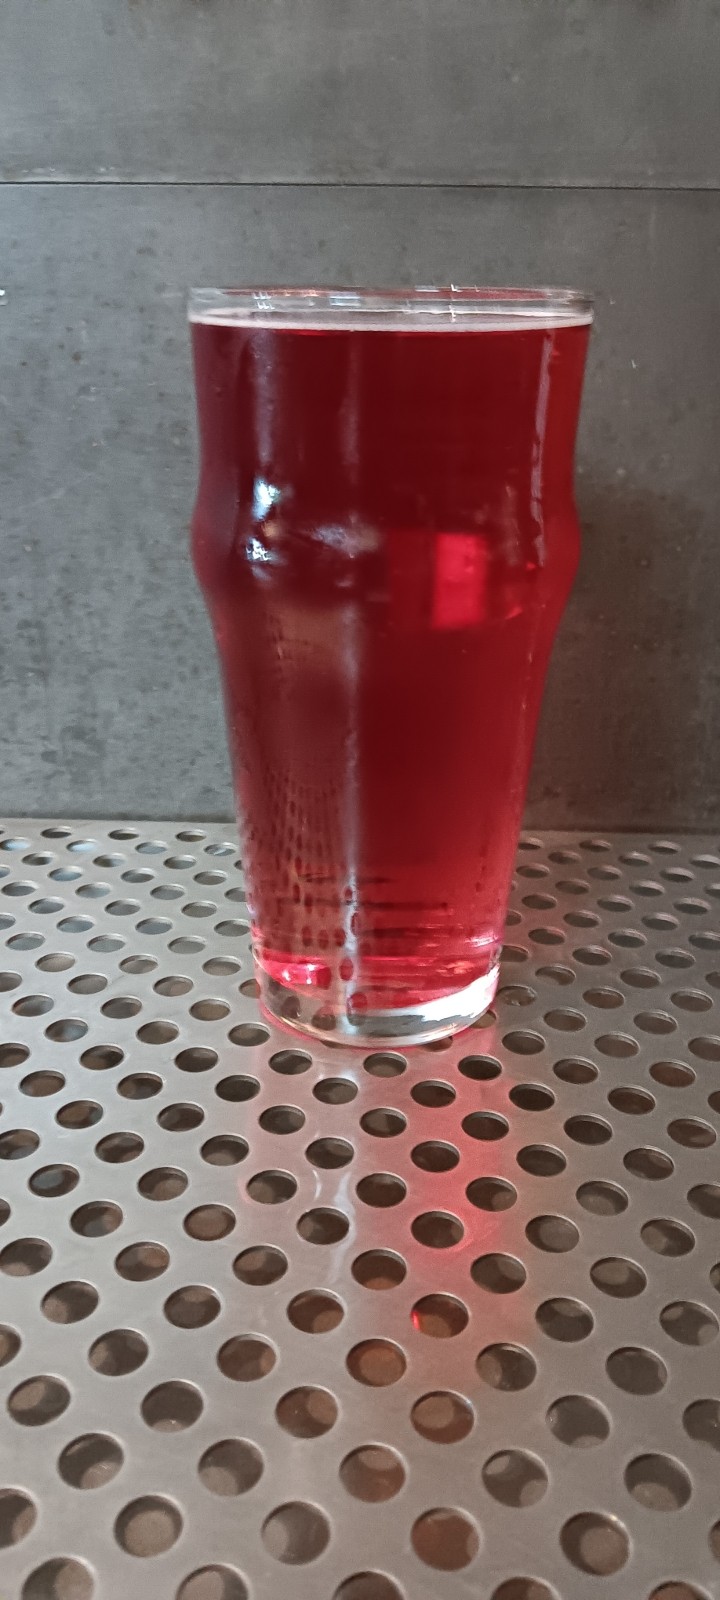 Two Rivers Pomegranate Cider, 6.9%